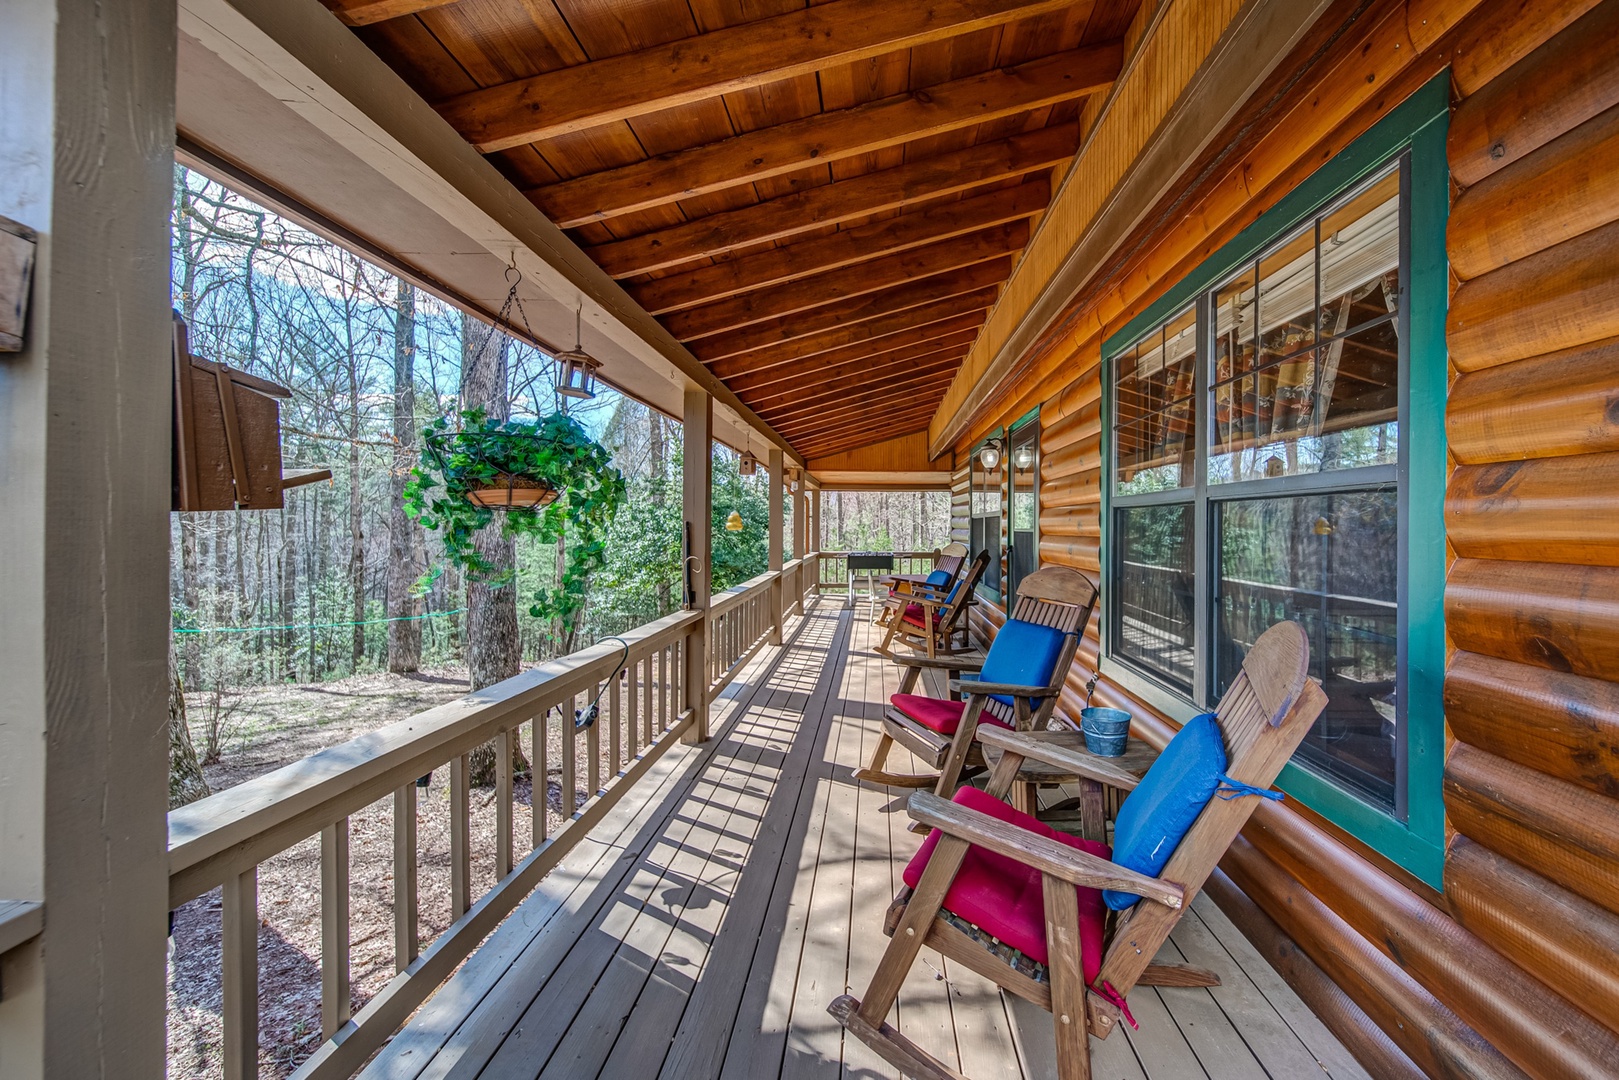 Enjoy morning coffee out on the covered porch with comfortable rocking chairs or watch the kids play in this home's huge yard